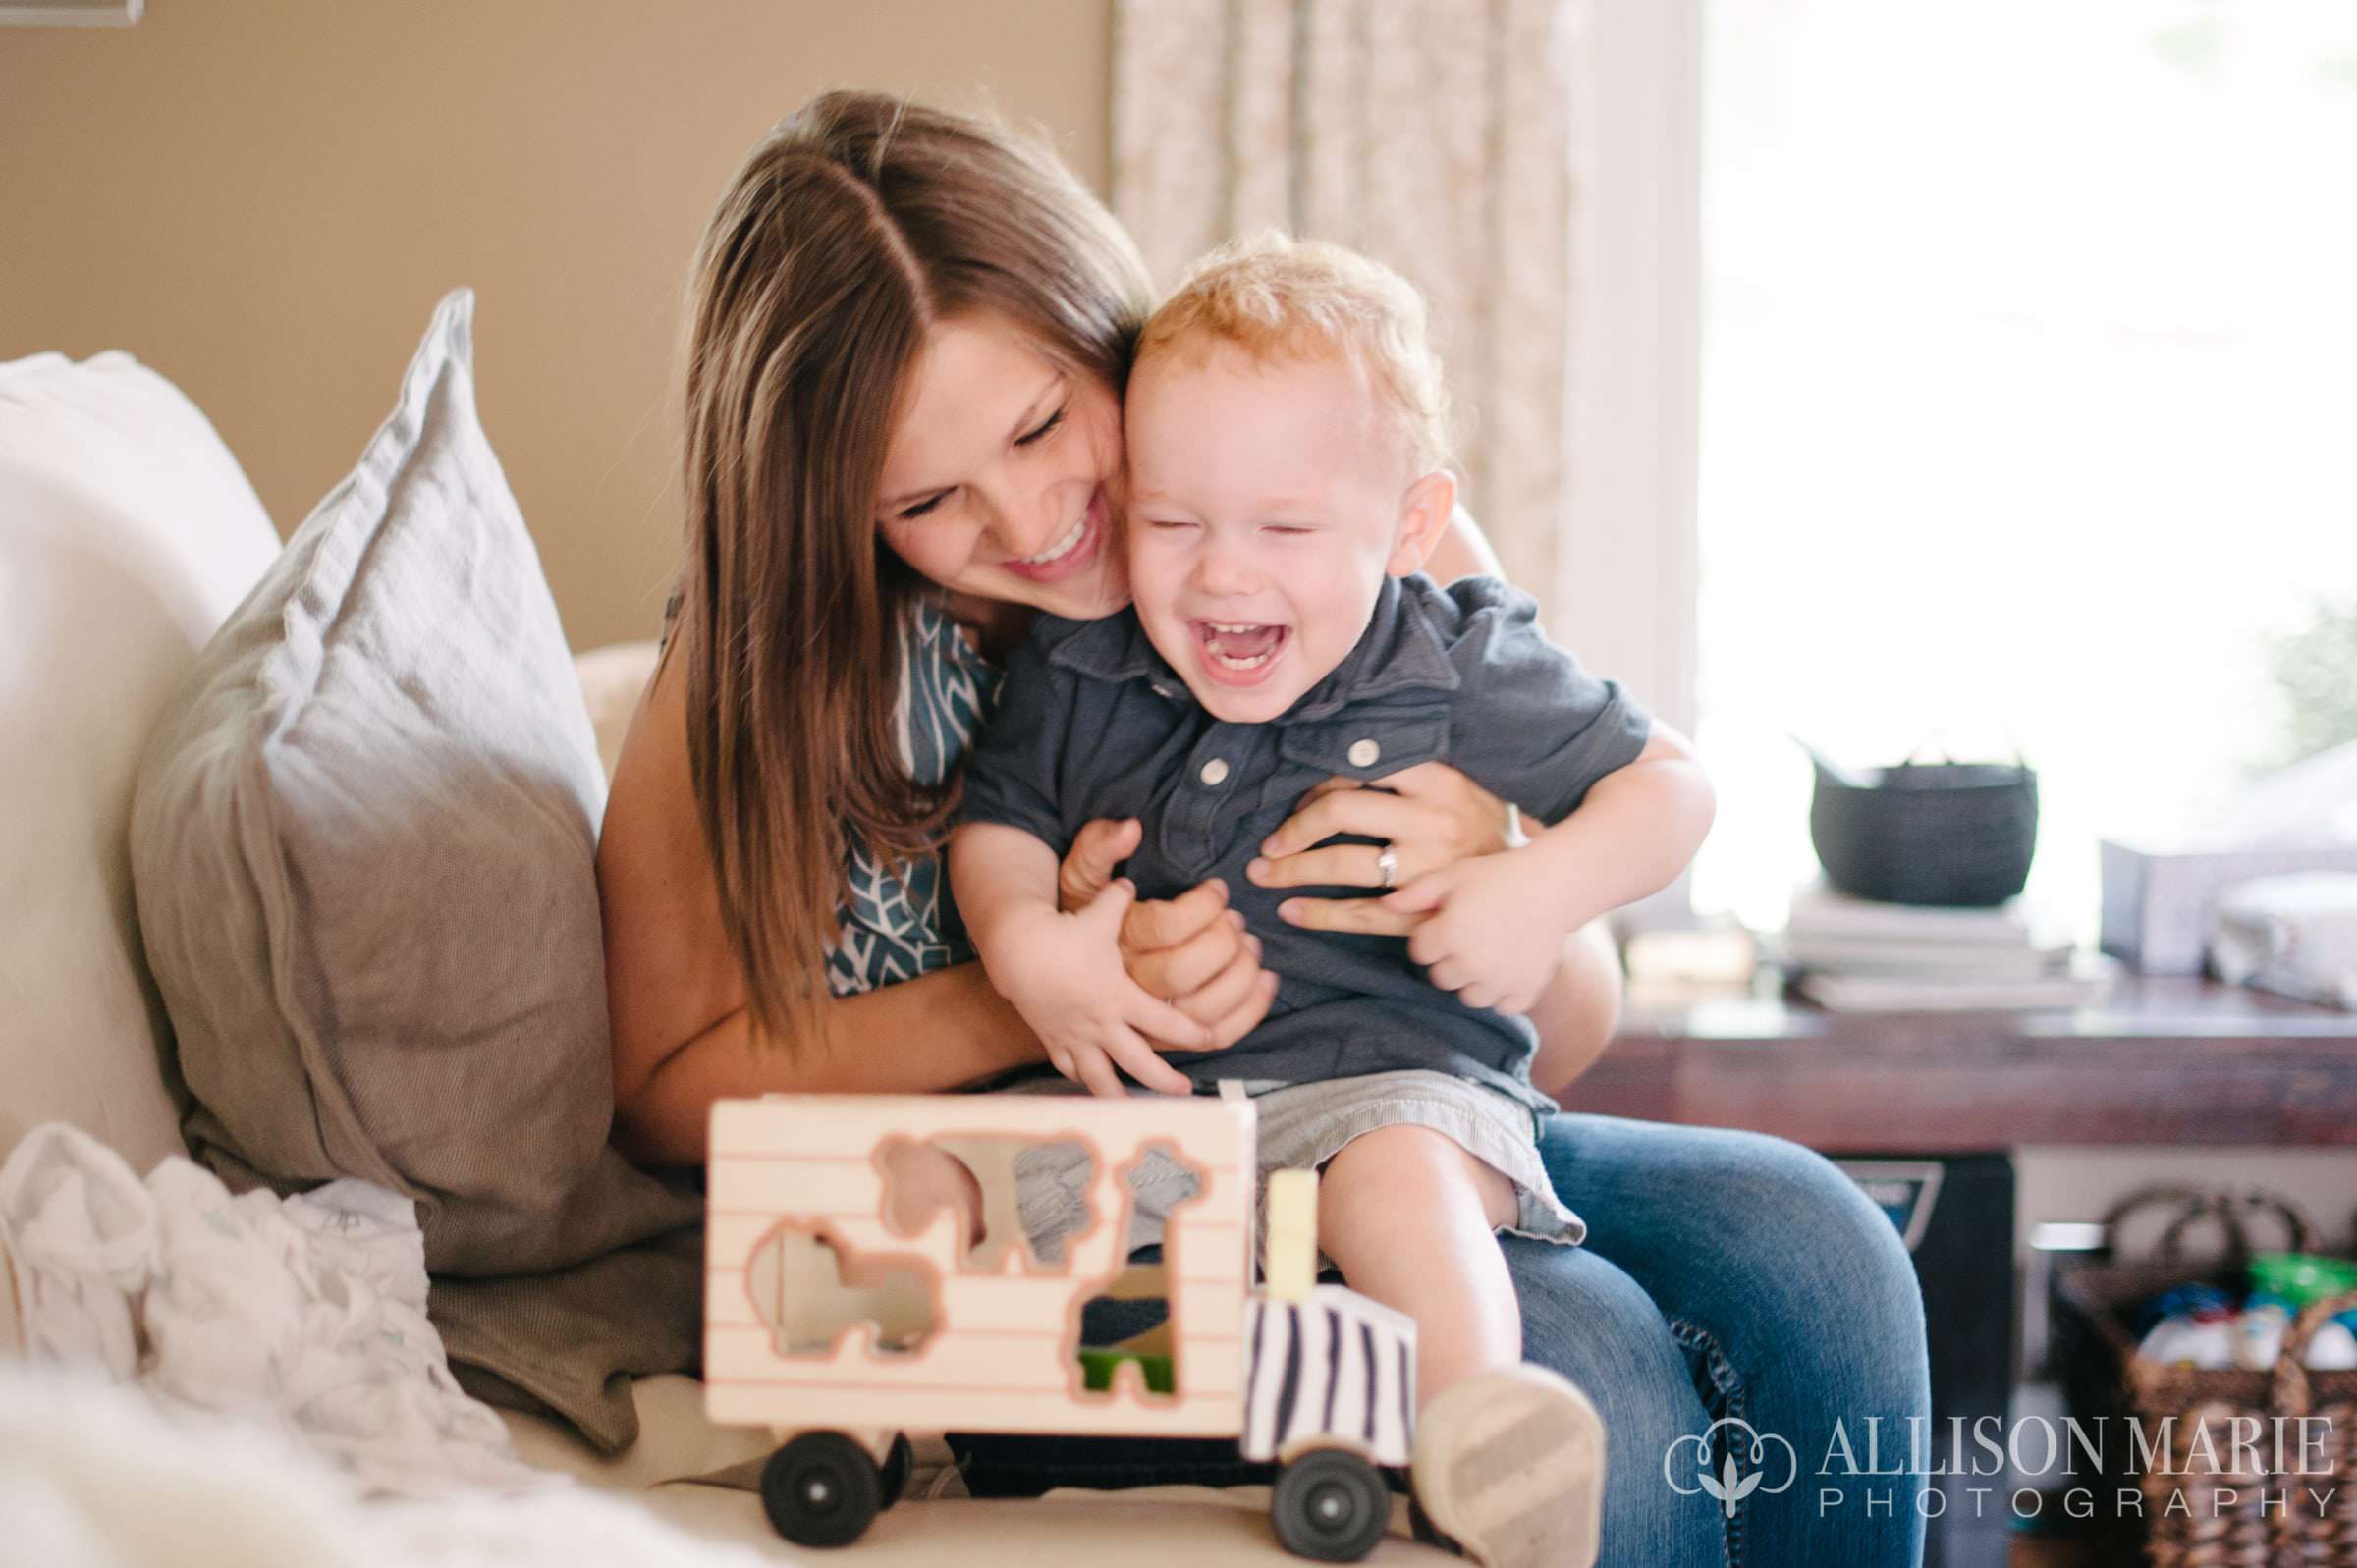 Favorite Family Images 2014, Allison Marie Photography06